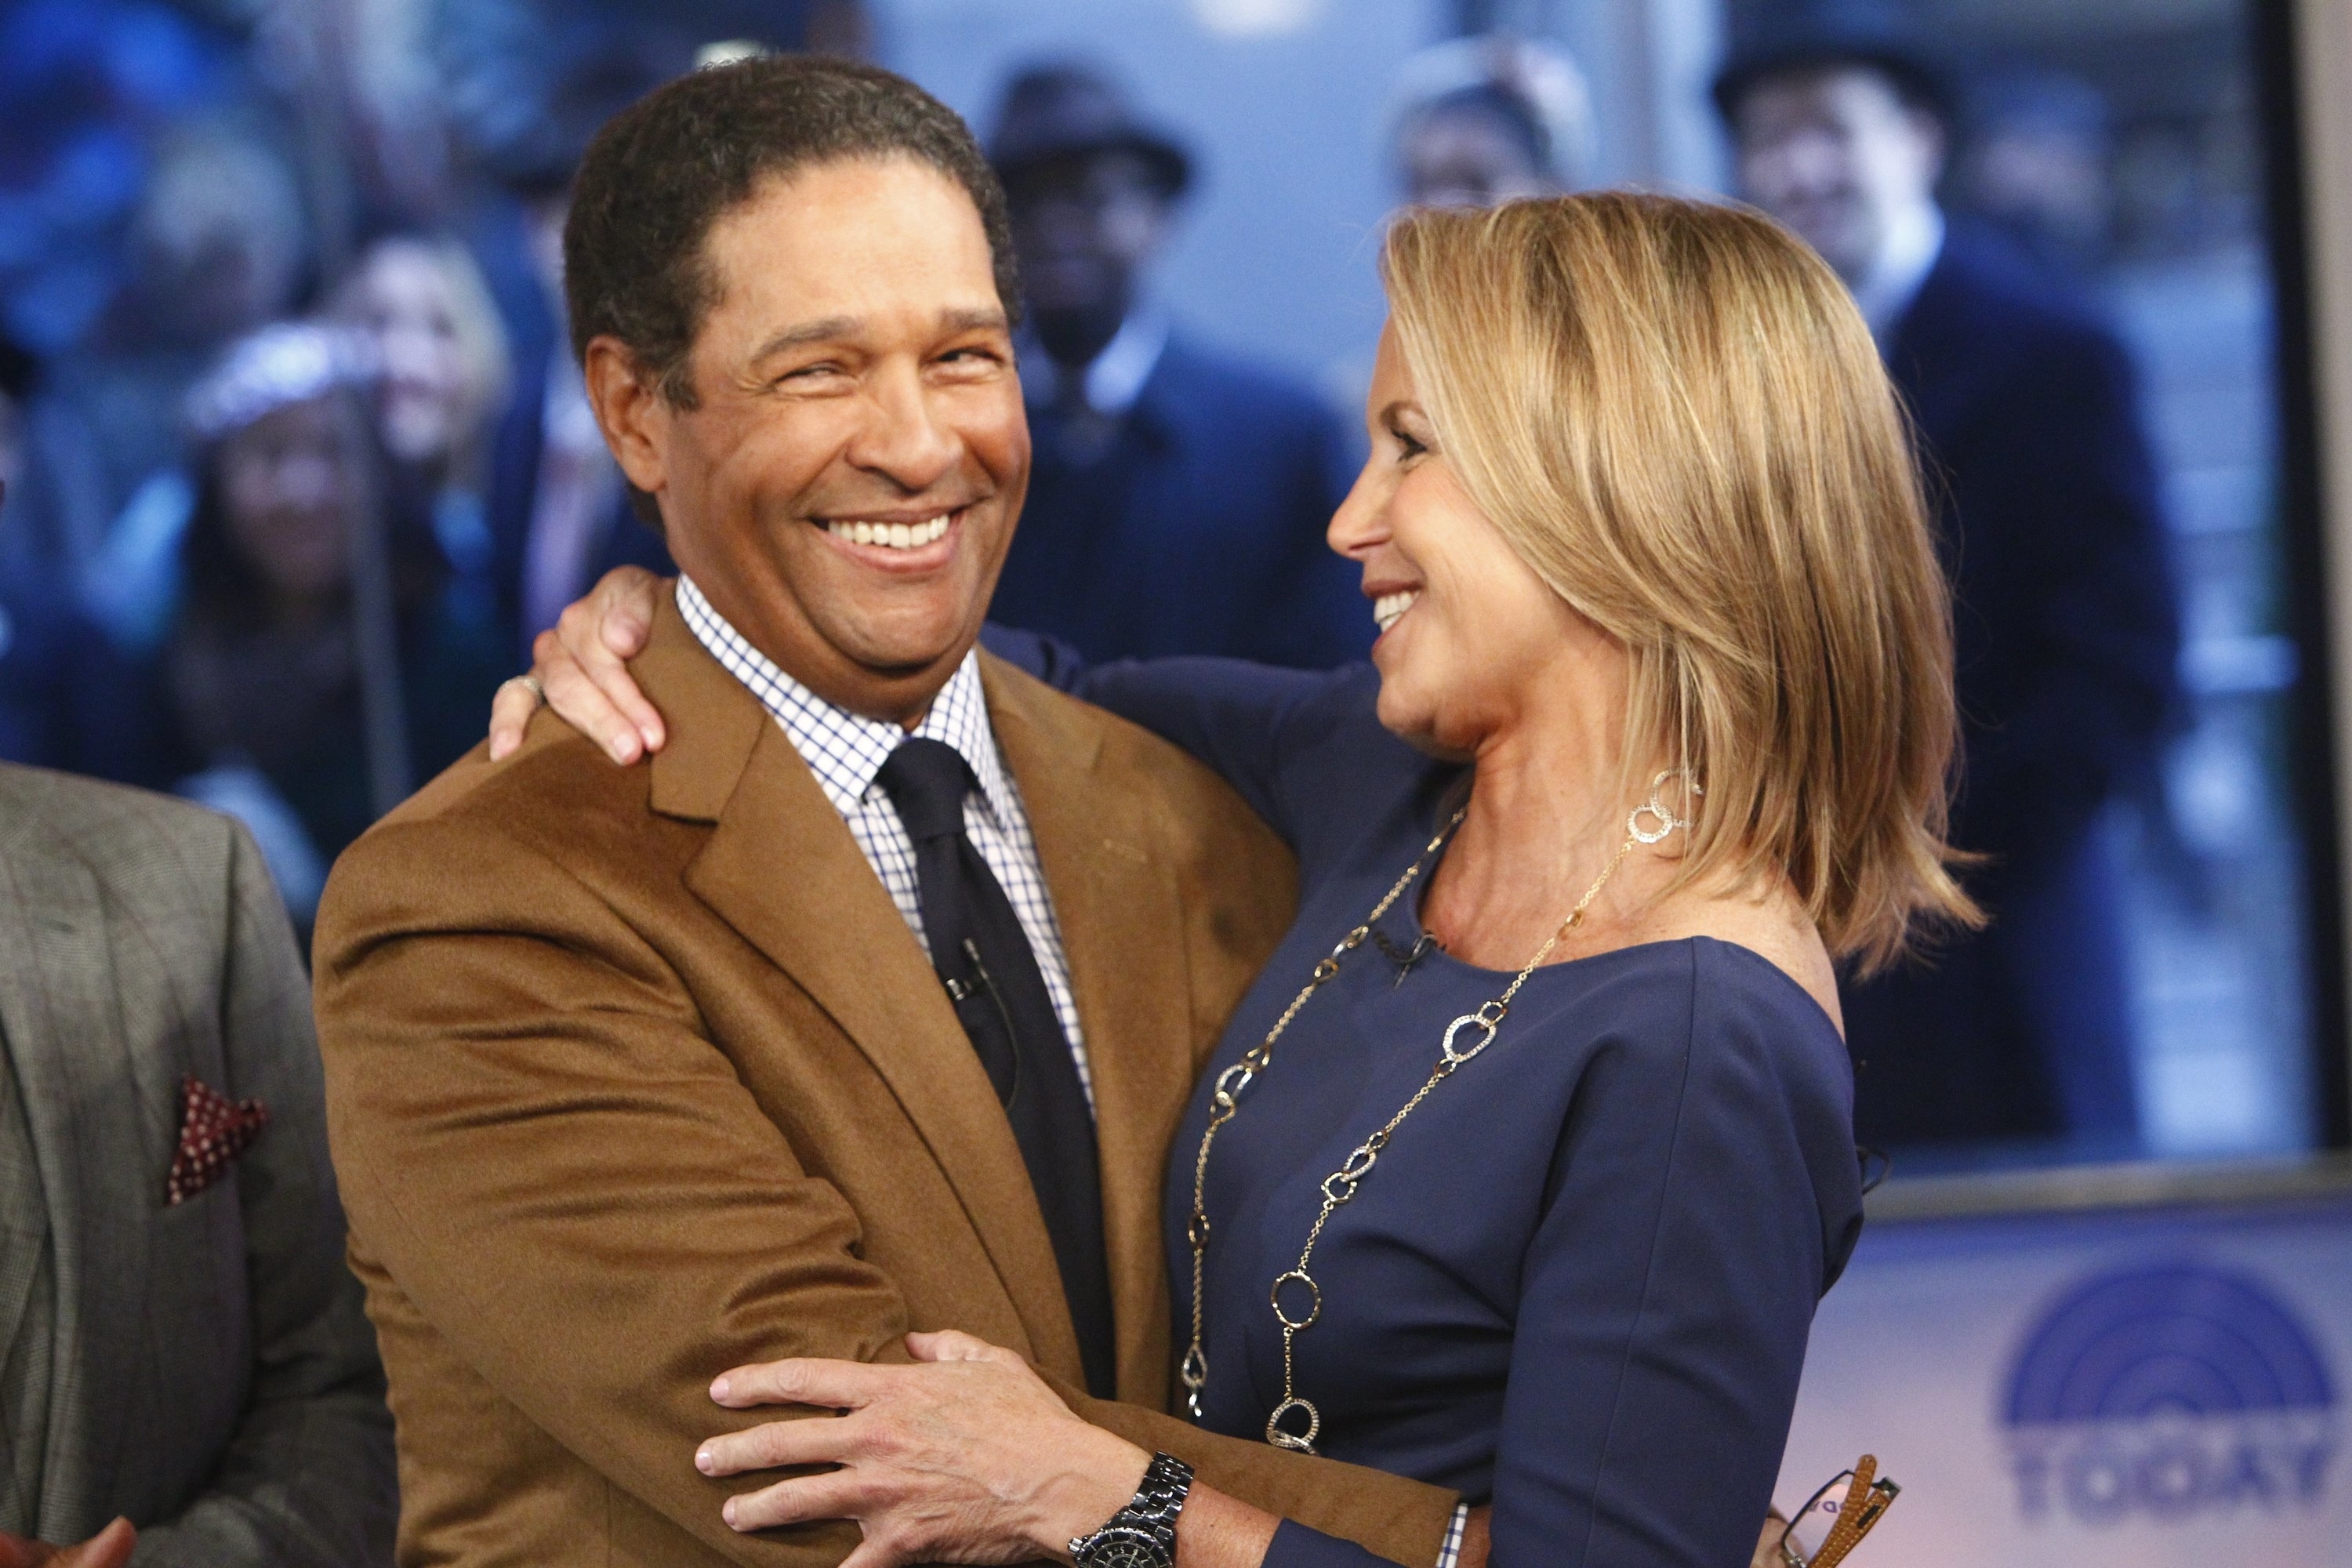 Bryant Gumbel and Katie Couric embracing and smiling